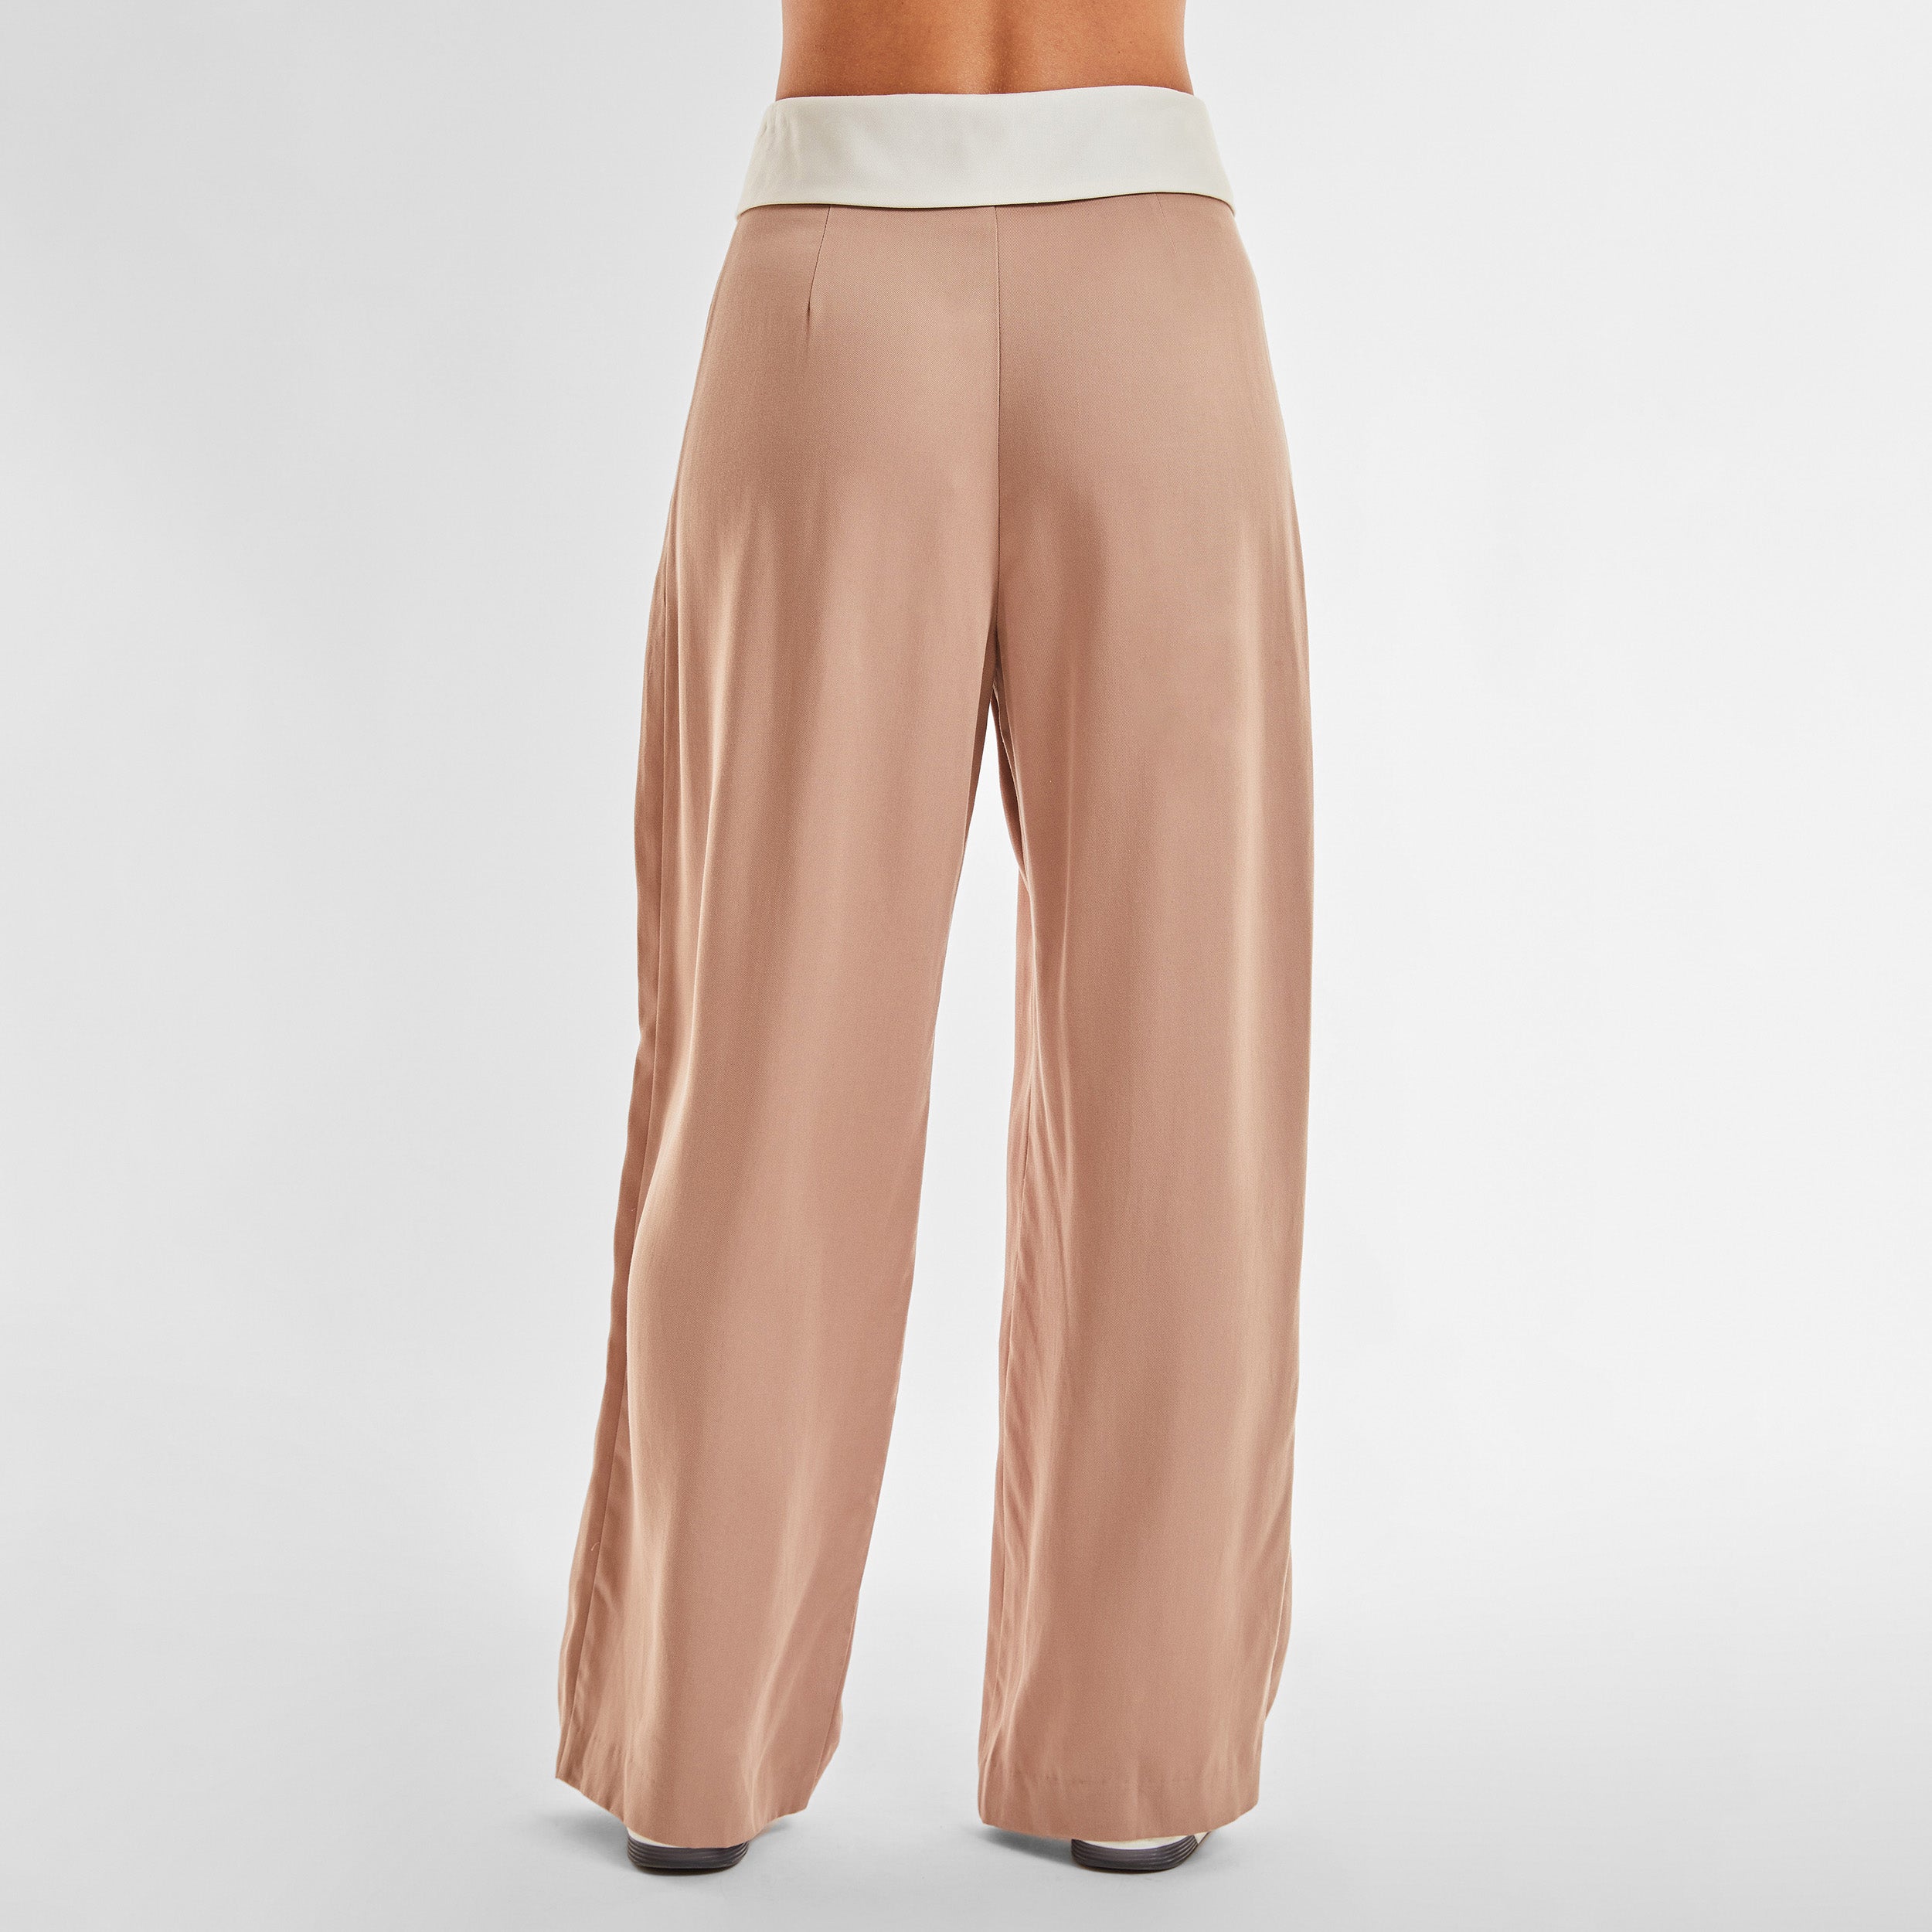 Rear view of woman wearing light brown trousers with white foldover waistband detail.